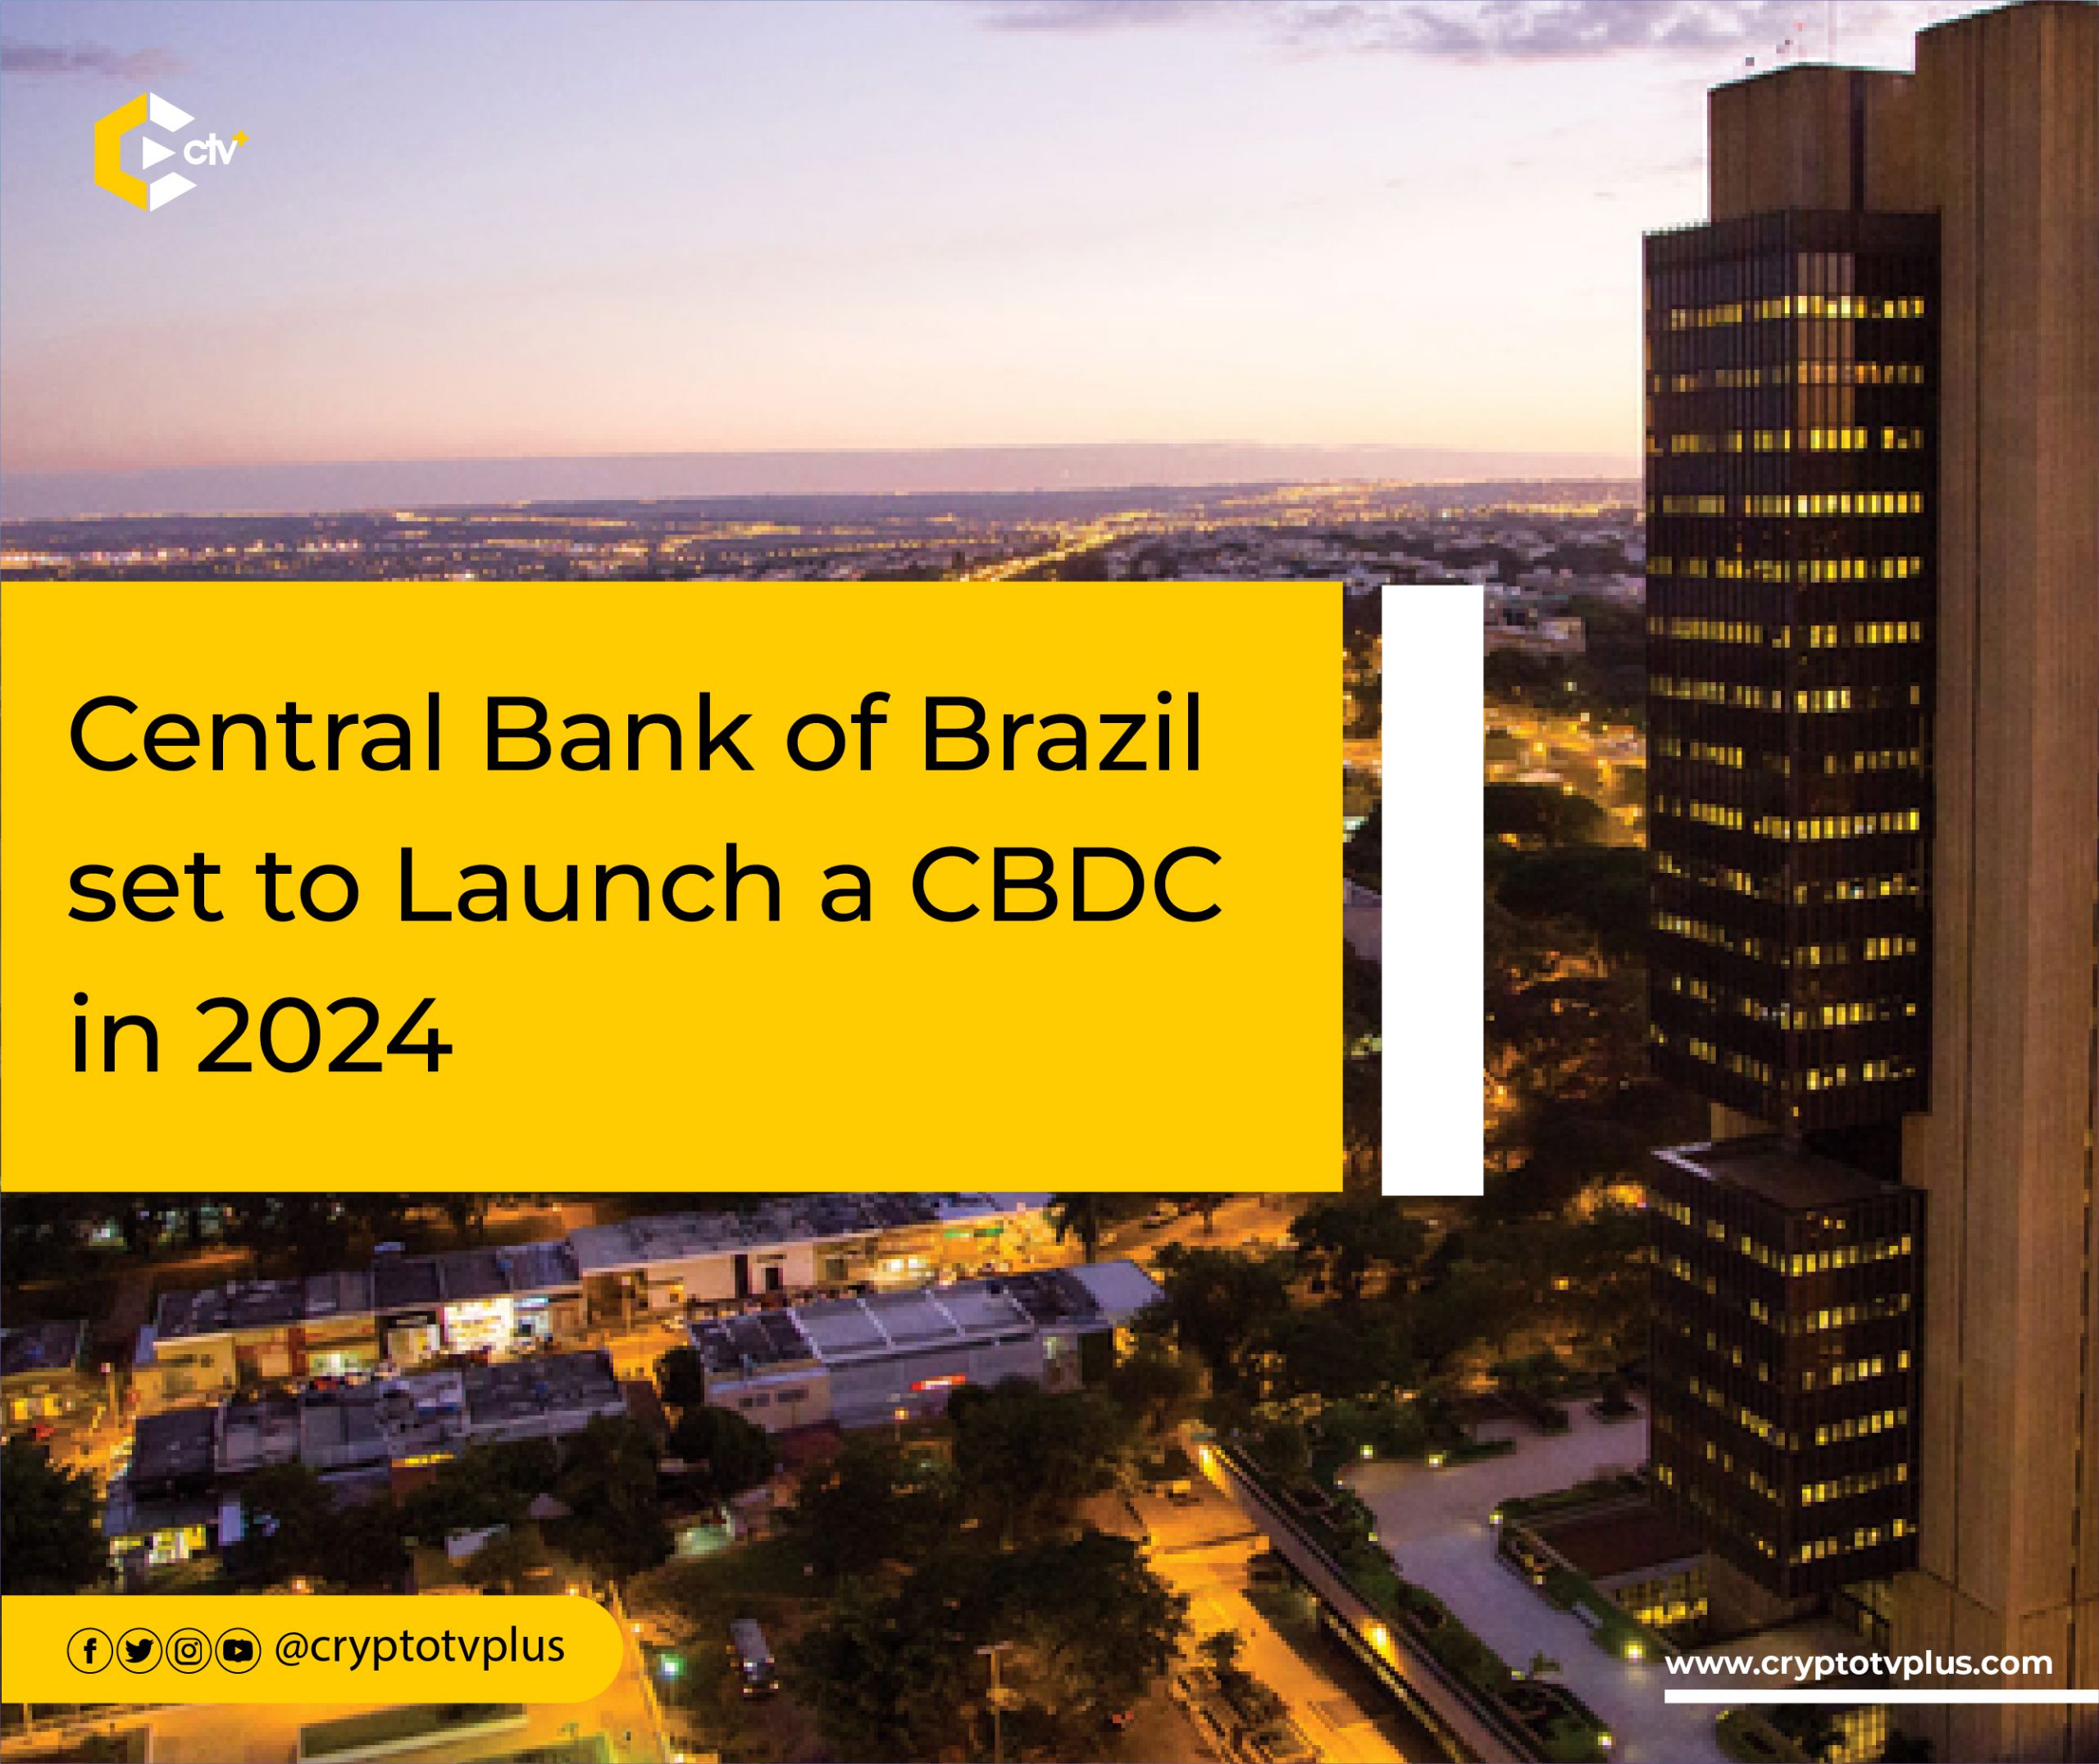 Central Bank of Brazil set to Launch a CBDC in 2024